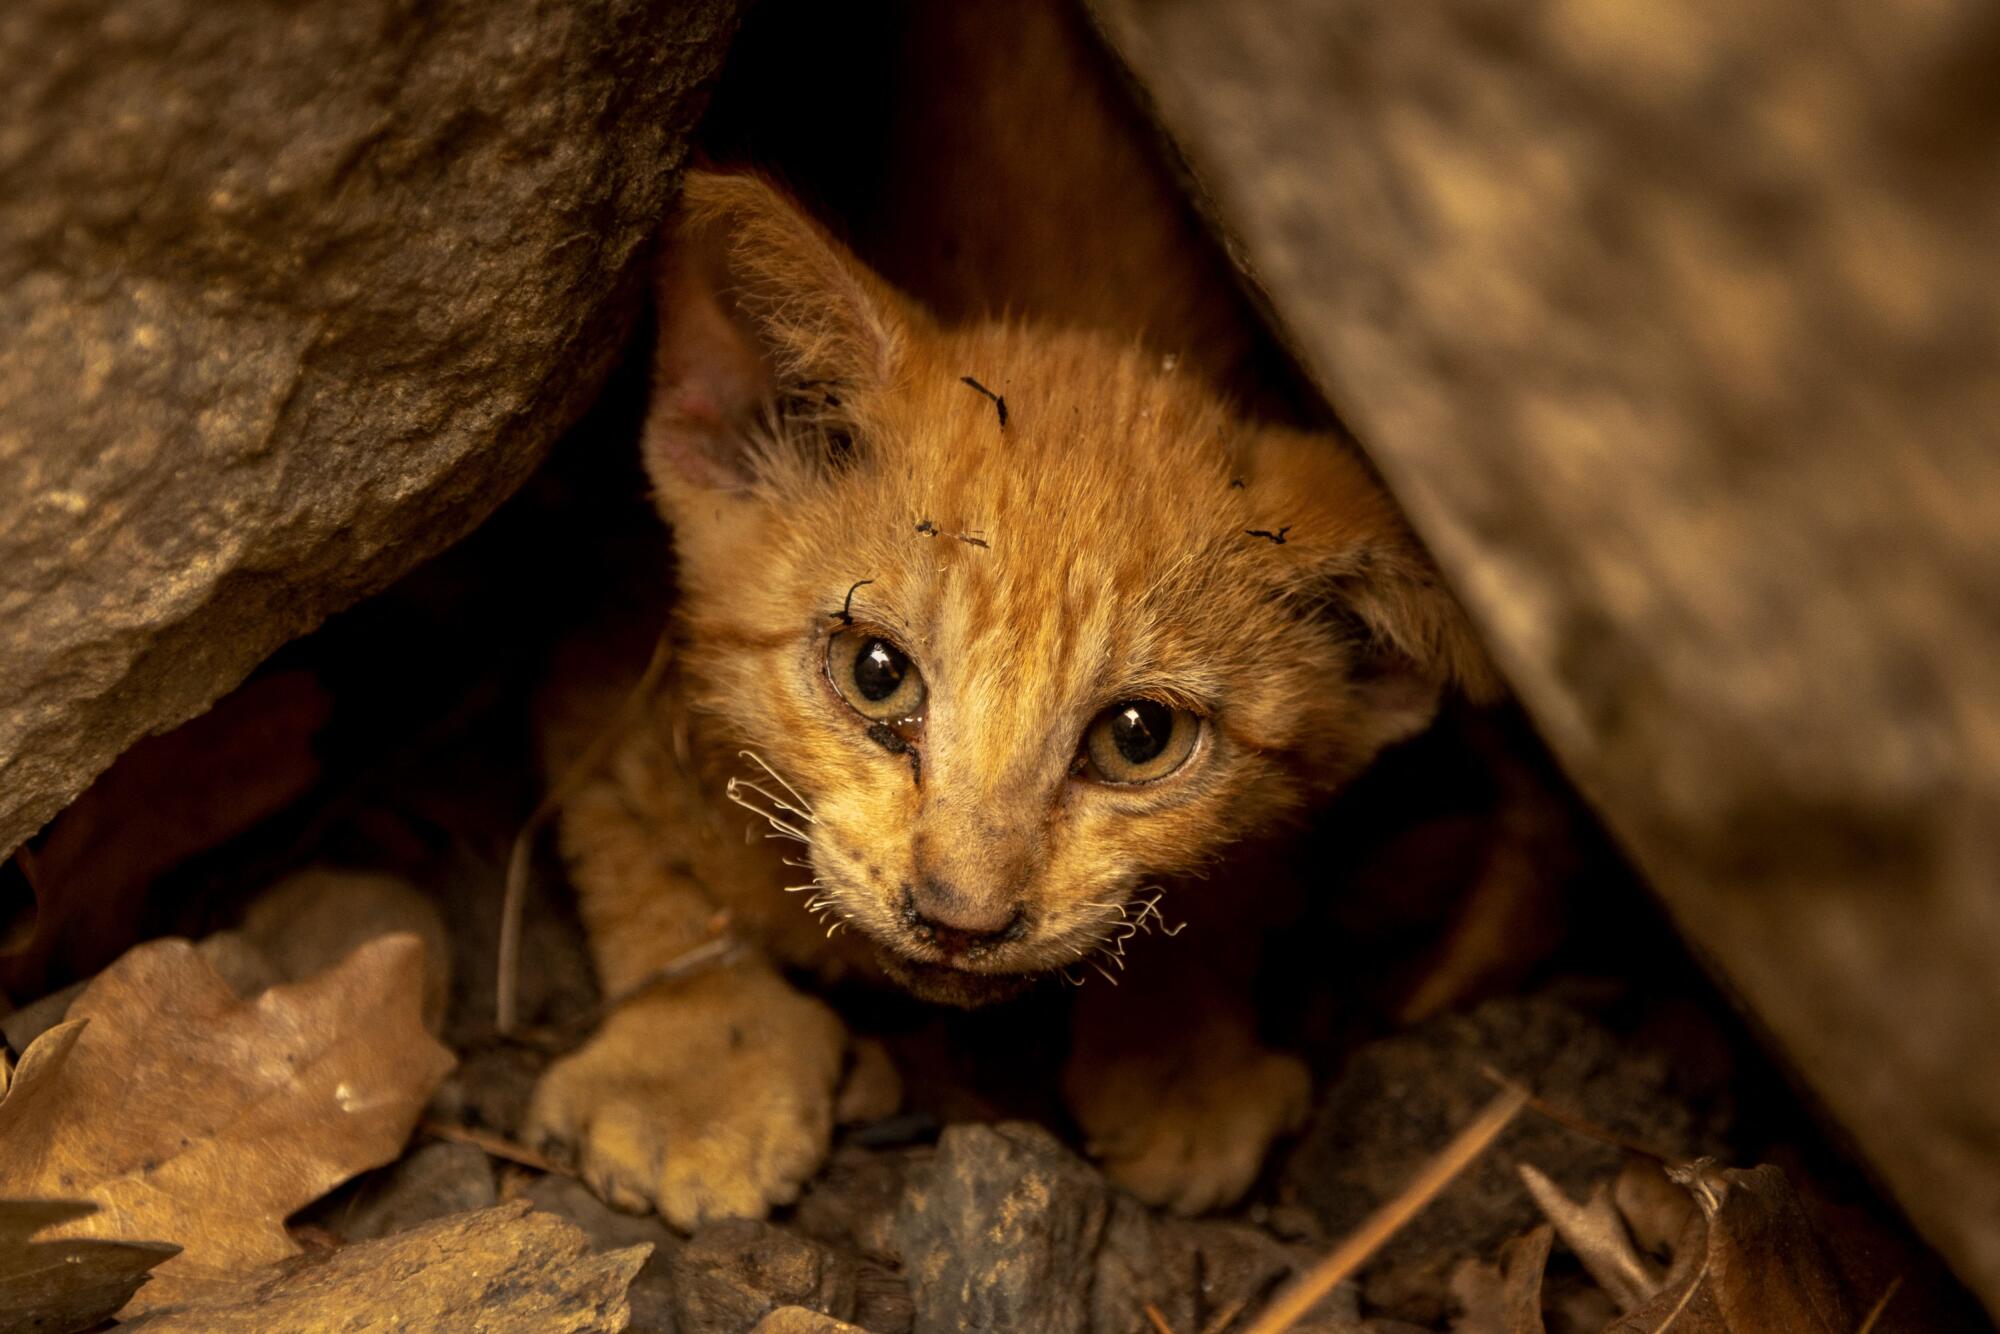 A kitten with singed whiskers hides in rocks in the Klamath National Forest.